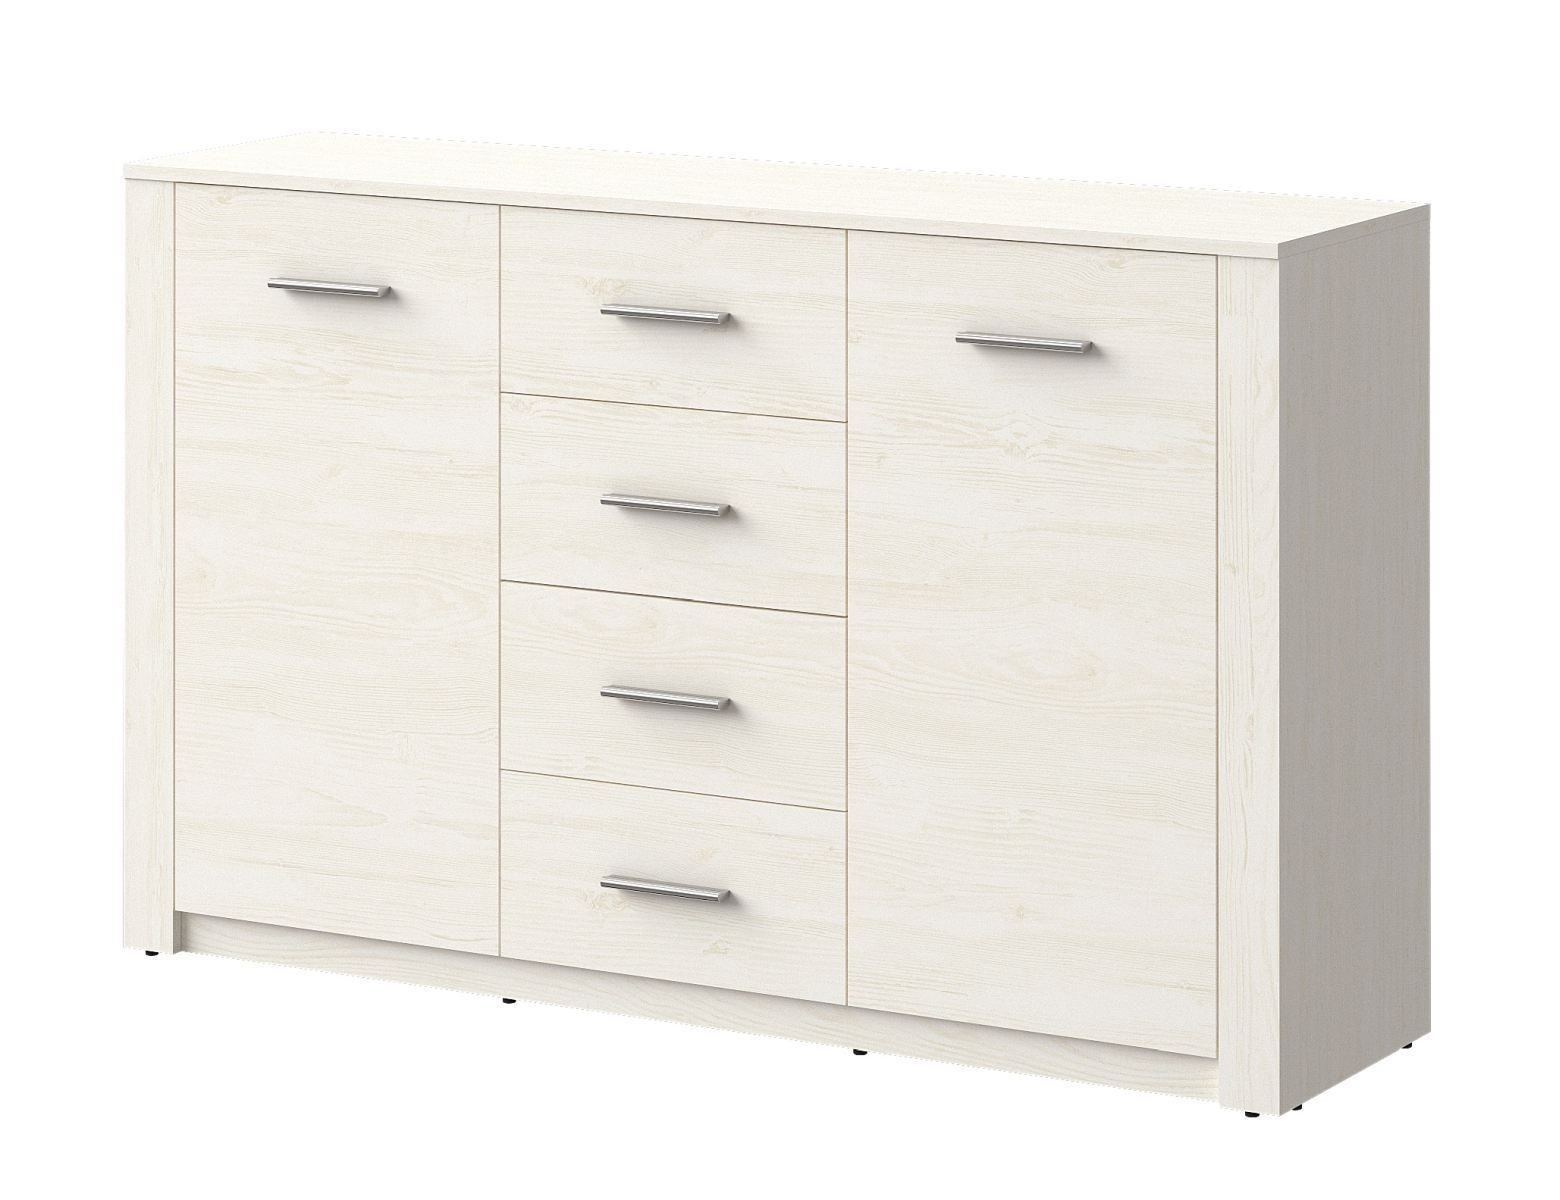 Chest of drawers Schleie 03, color: pine white - Dimensions: 91 x 147 x 40 cm (H x W x D)